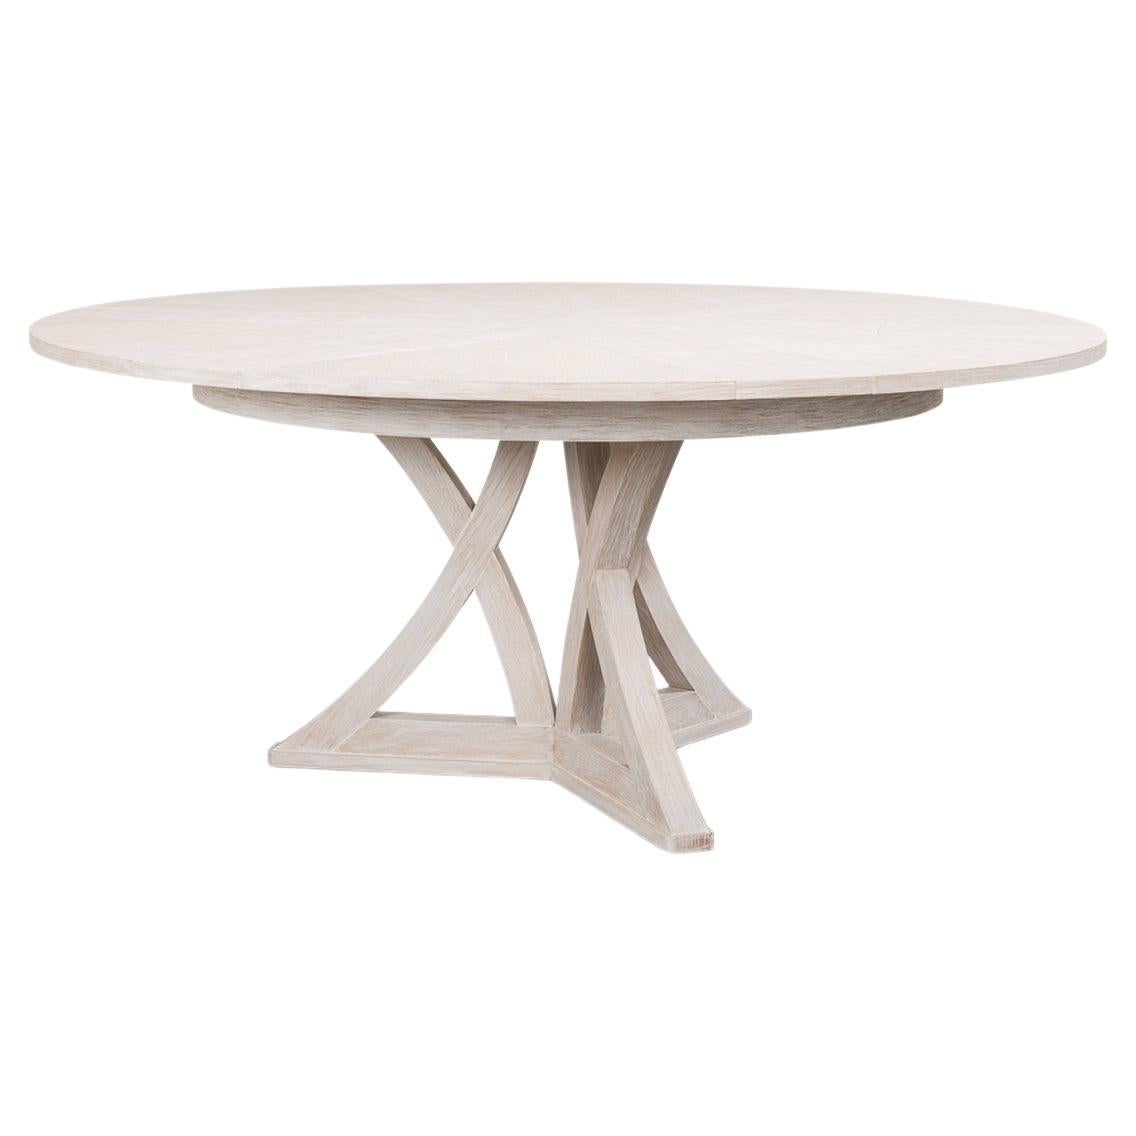 Rustic Round Dining Table - Whitewash White For Sale